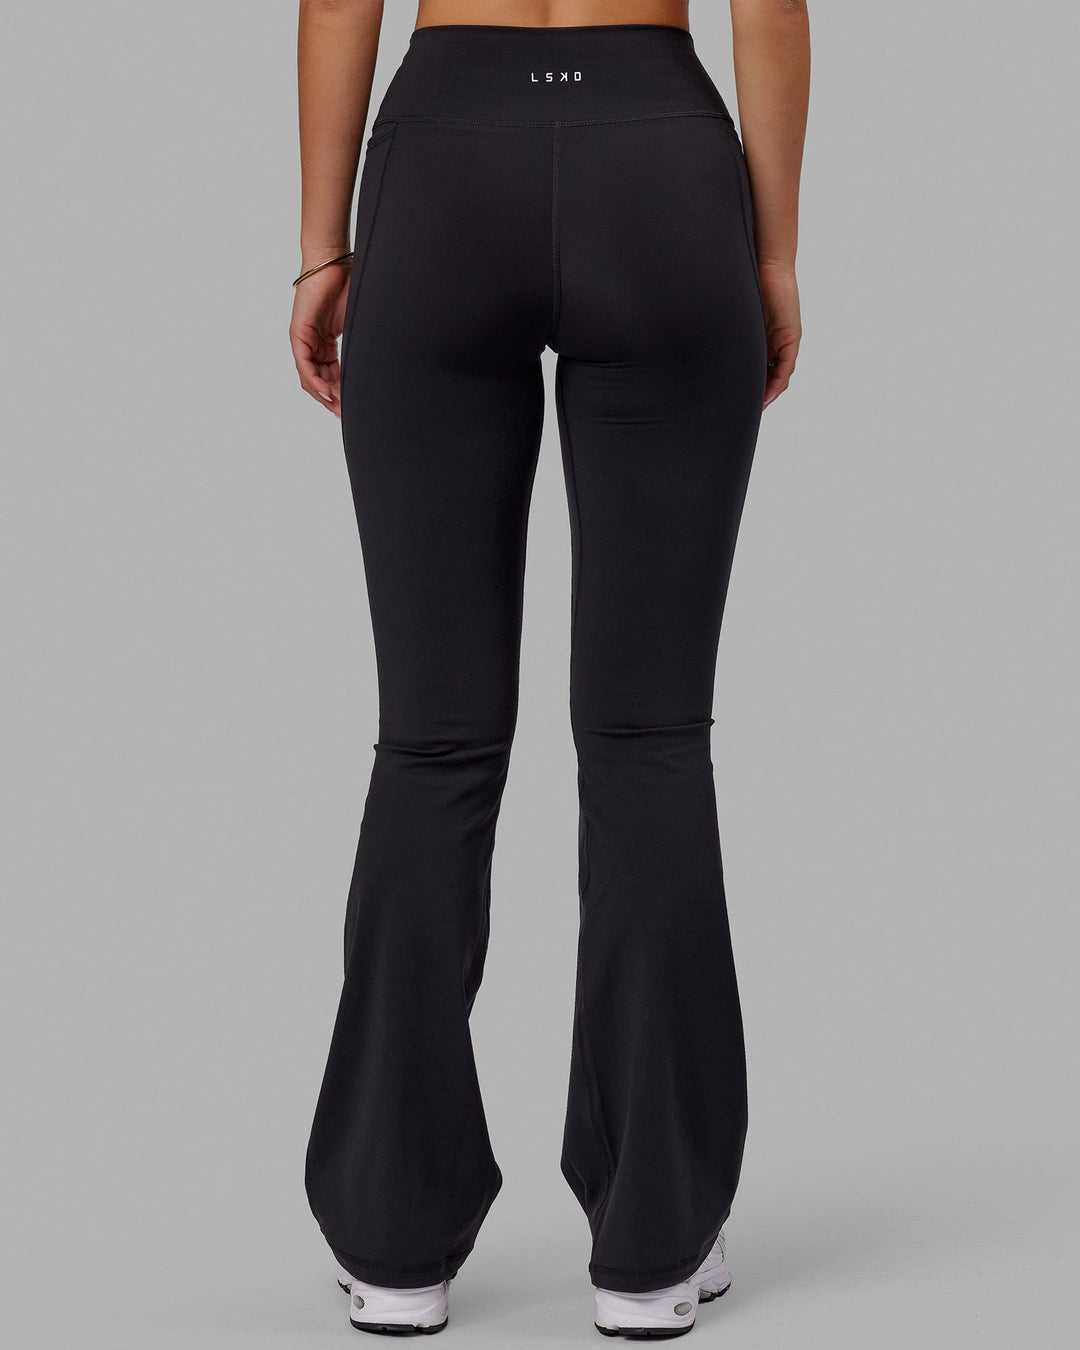 Woman wearing Everyday Flare Tight With Pockets - Black